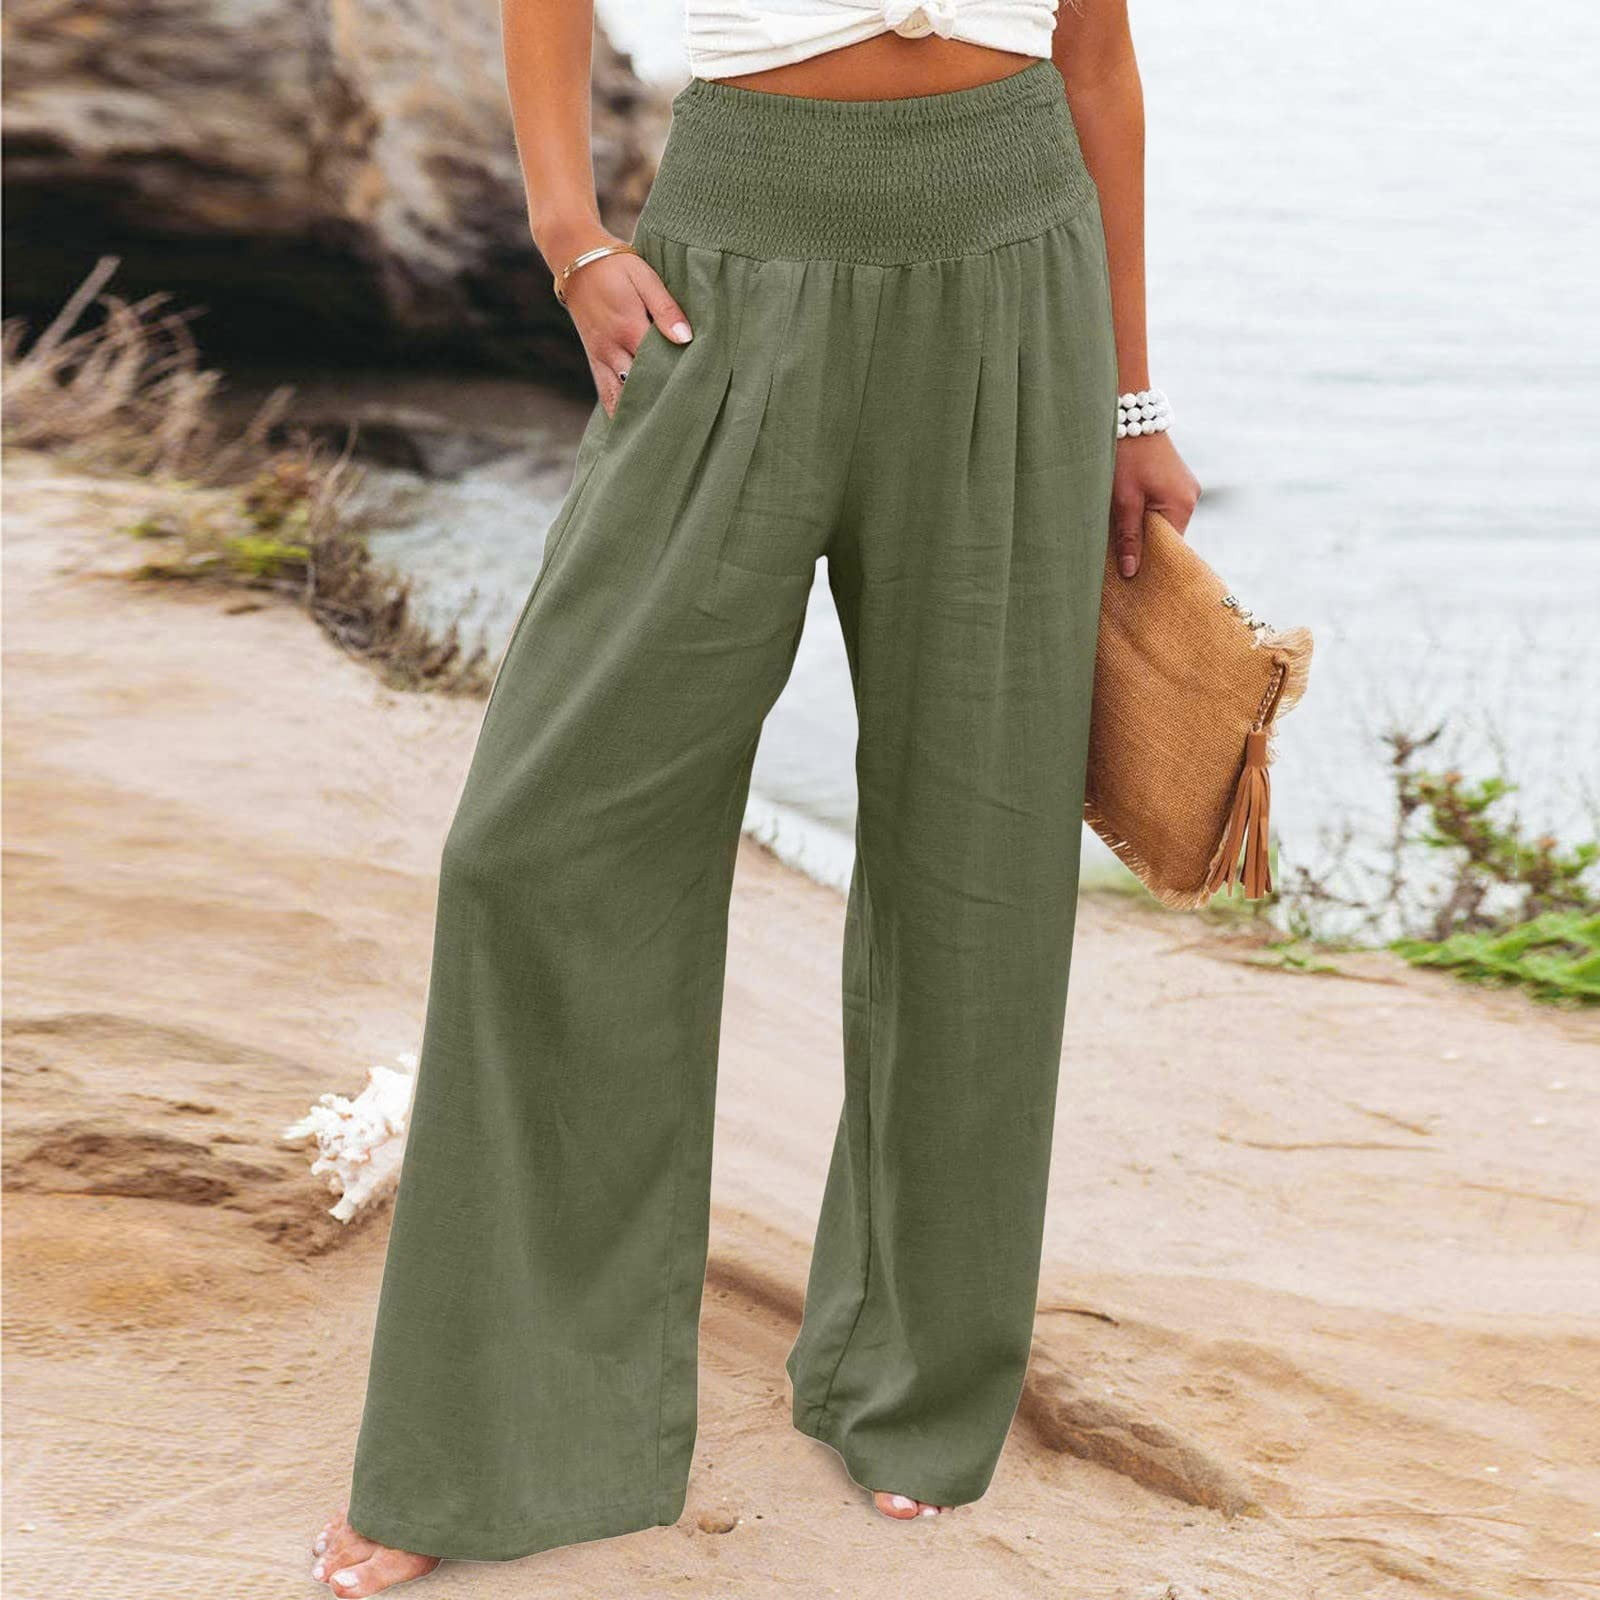 Owordtank Womens High Waist Palazzo Pants Loose Fitted Casual Wide Leg ...